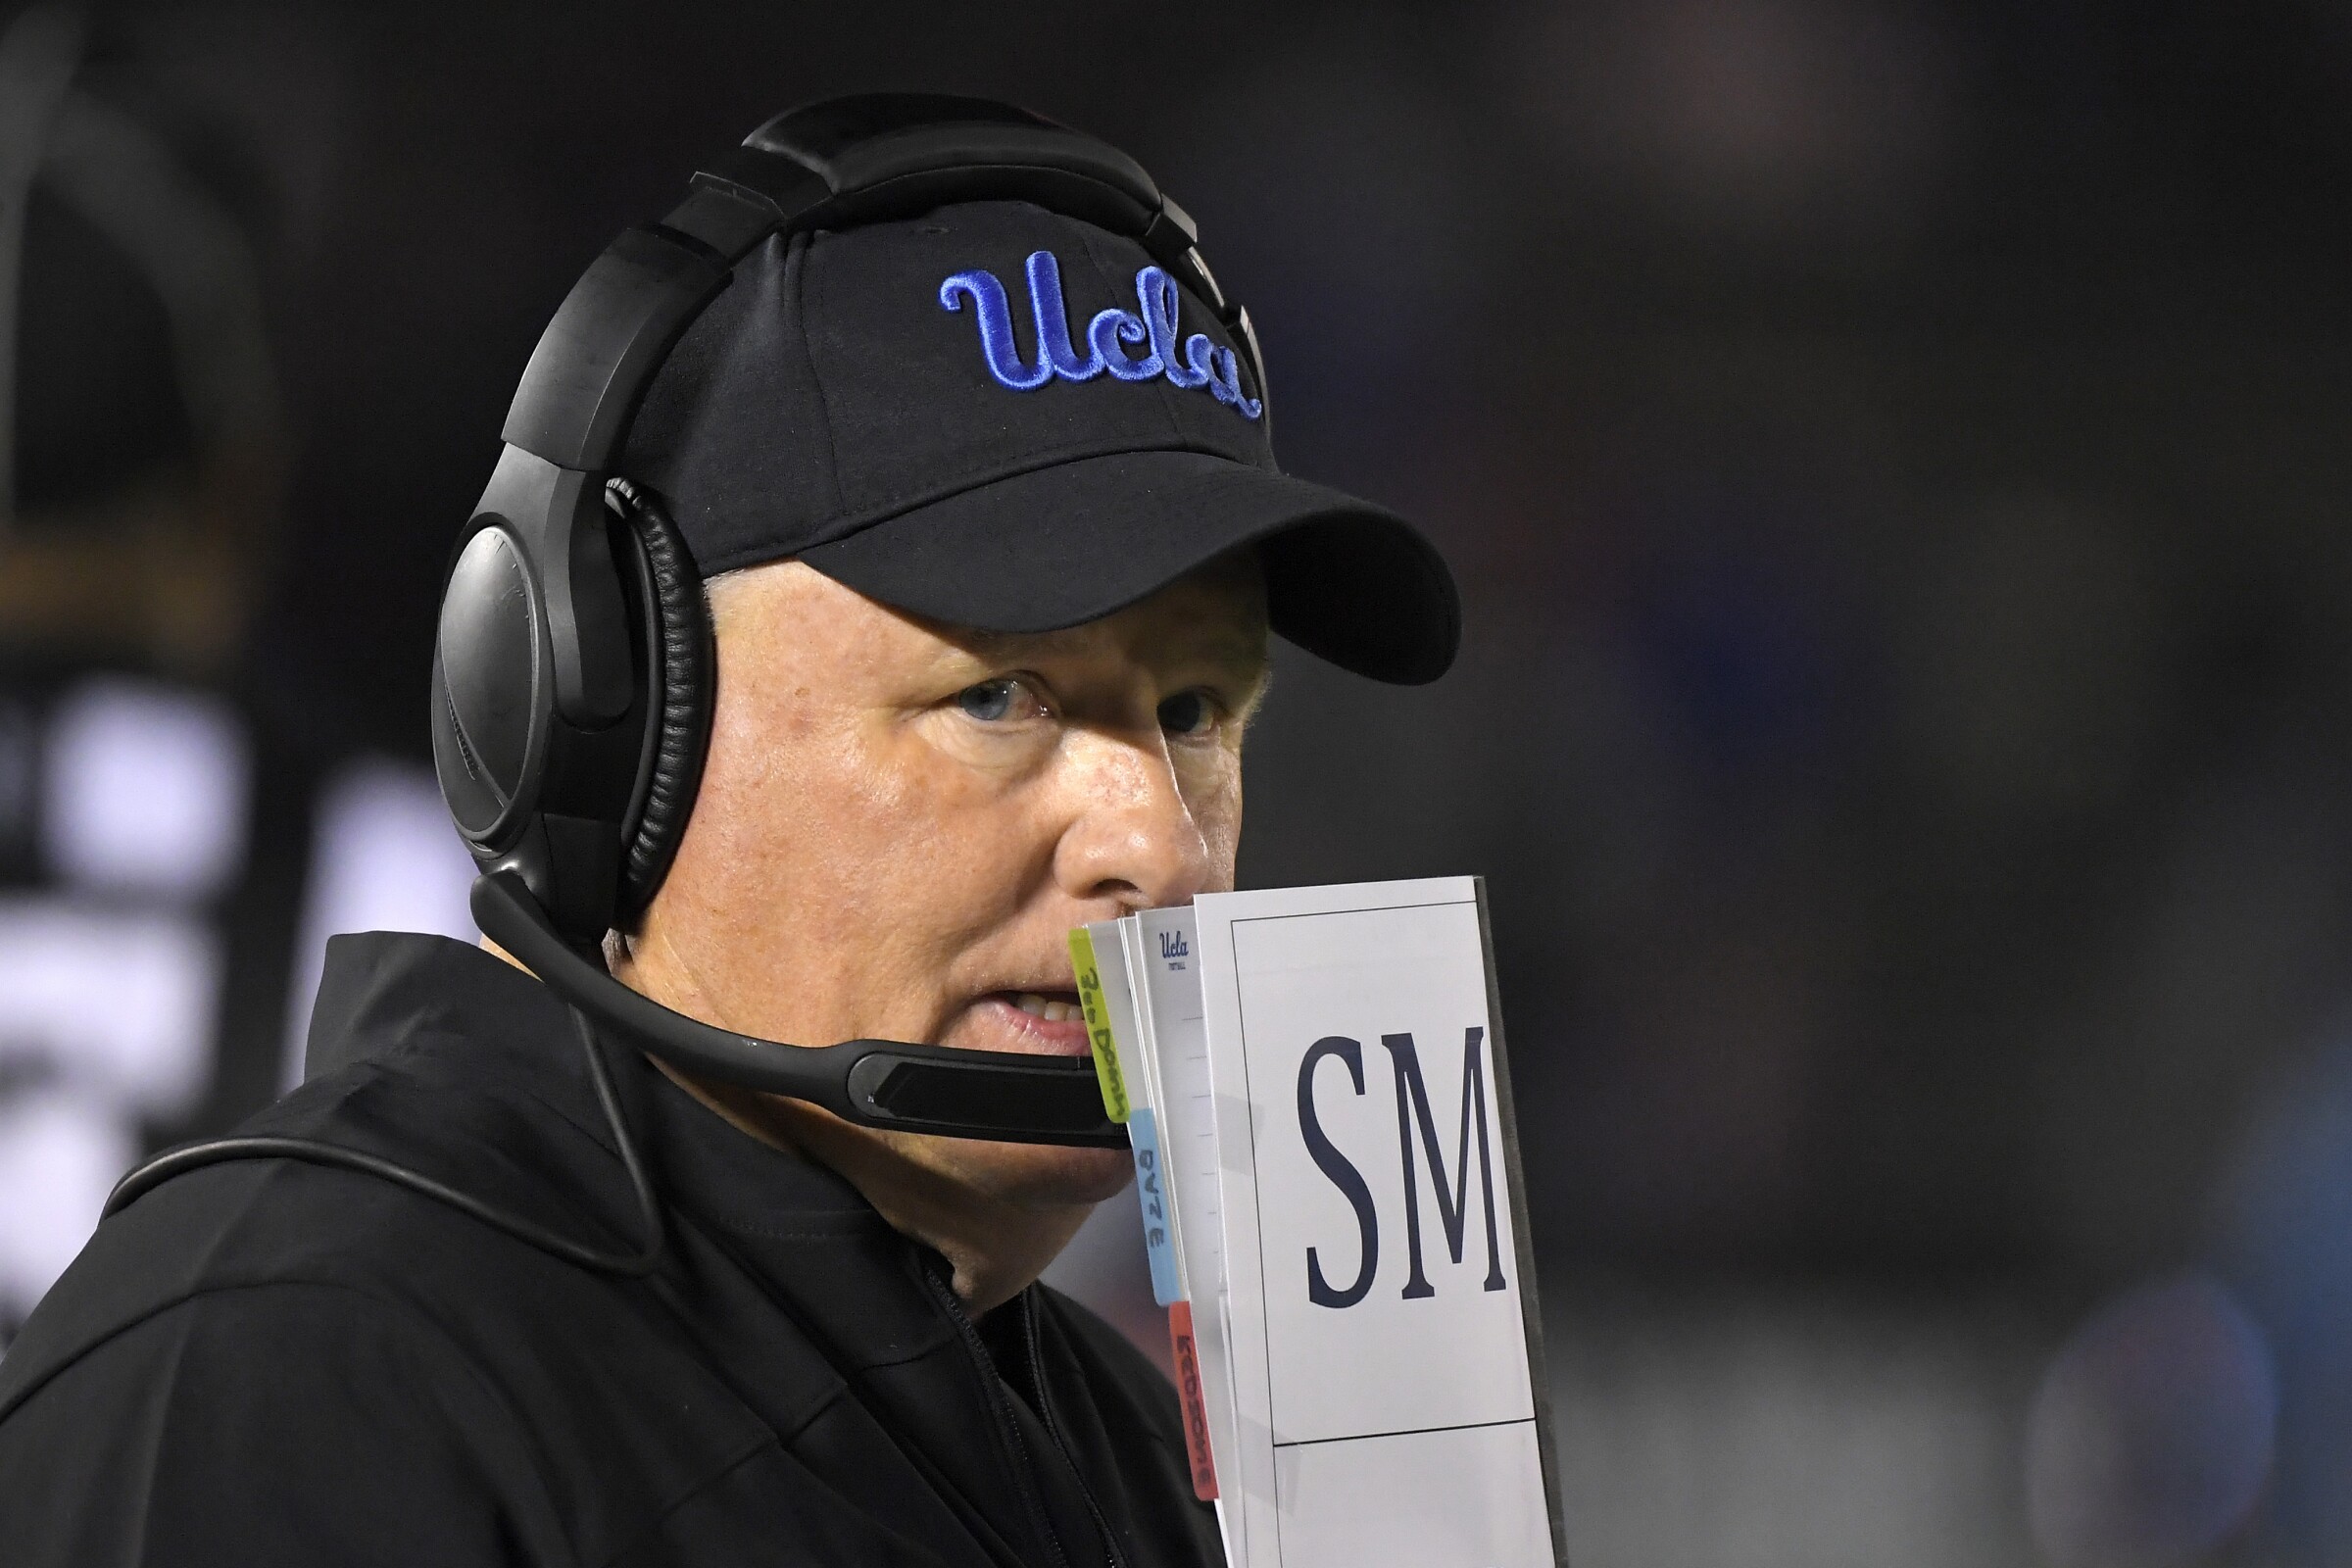 UCLA head coach Chip Kelly covers his mouth with a playbook while standing on the sideline